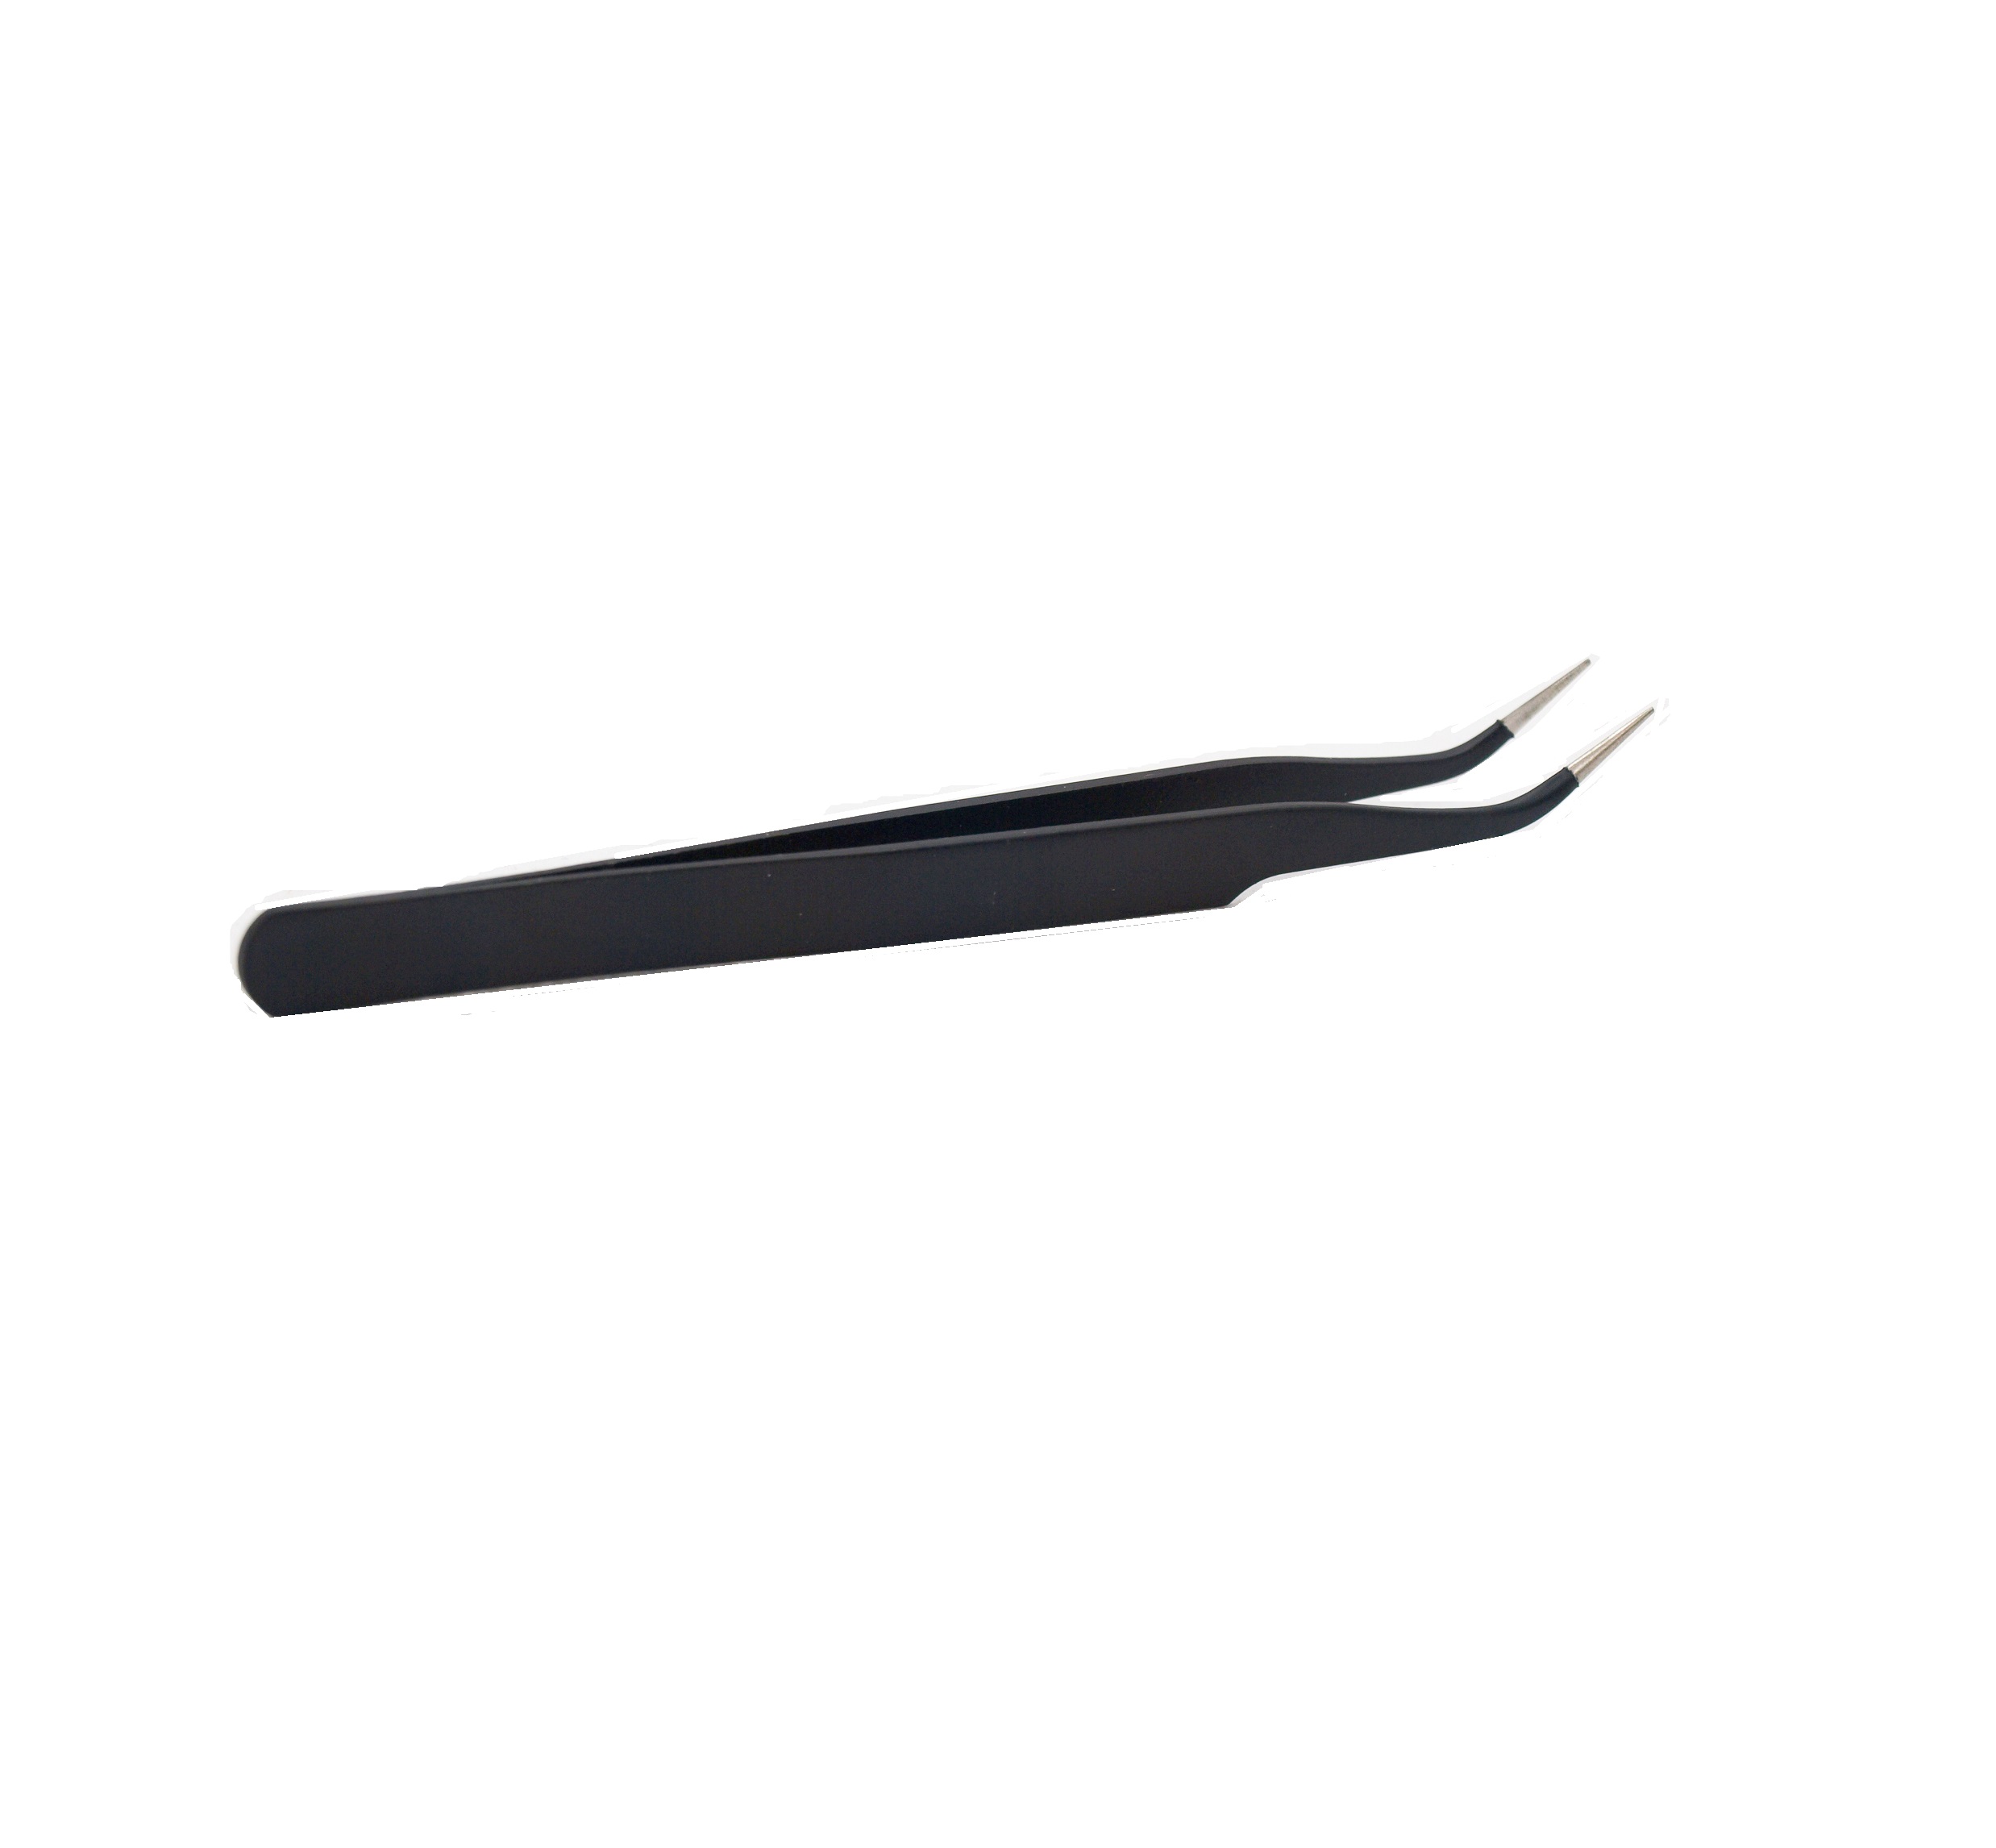 Tweezer with curved tip for miniatura.